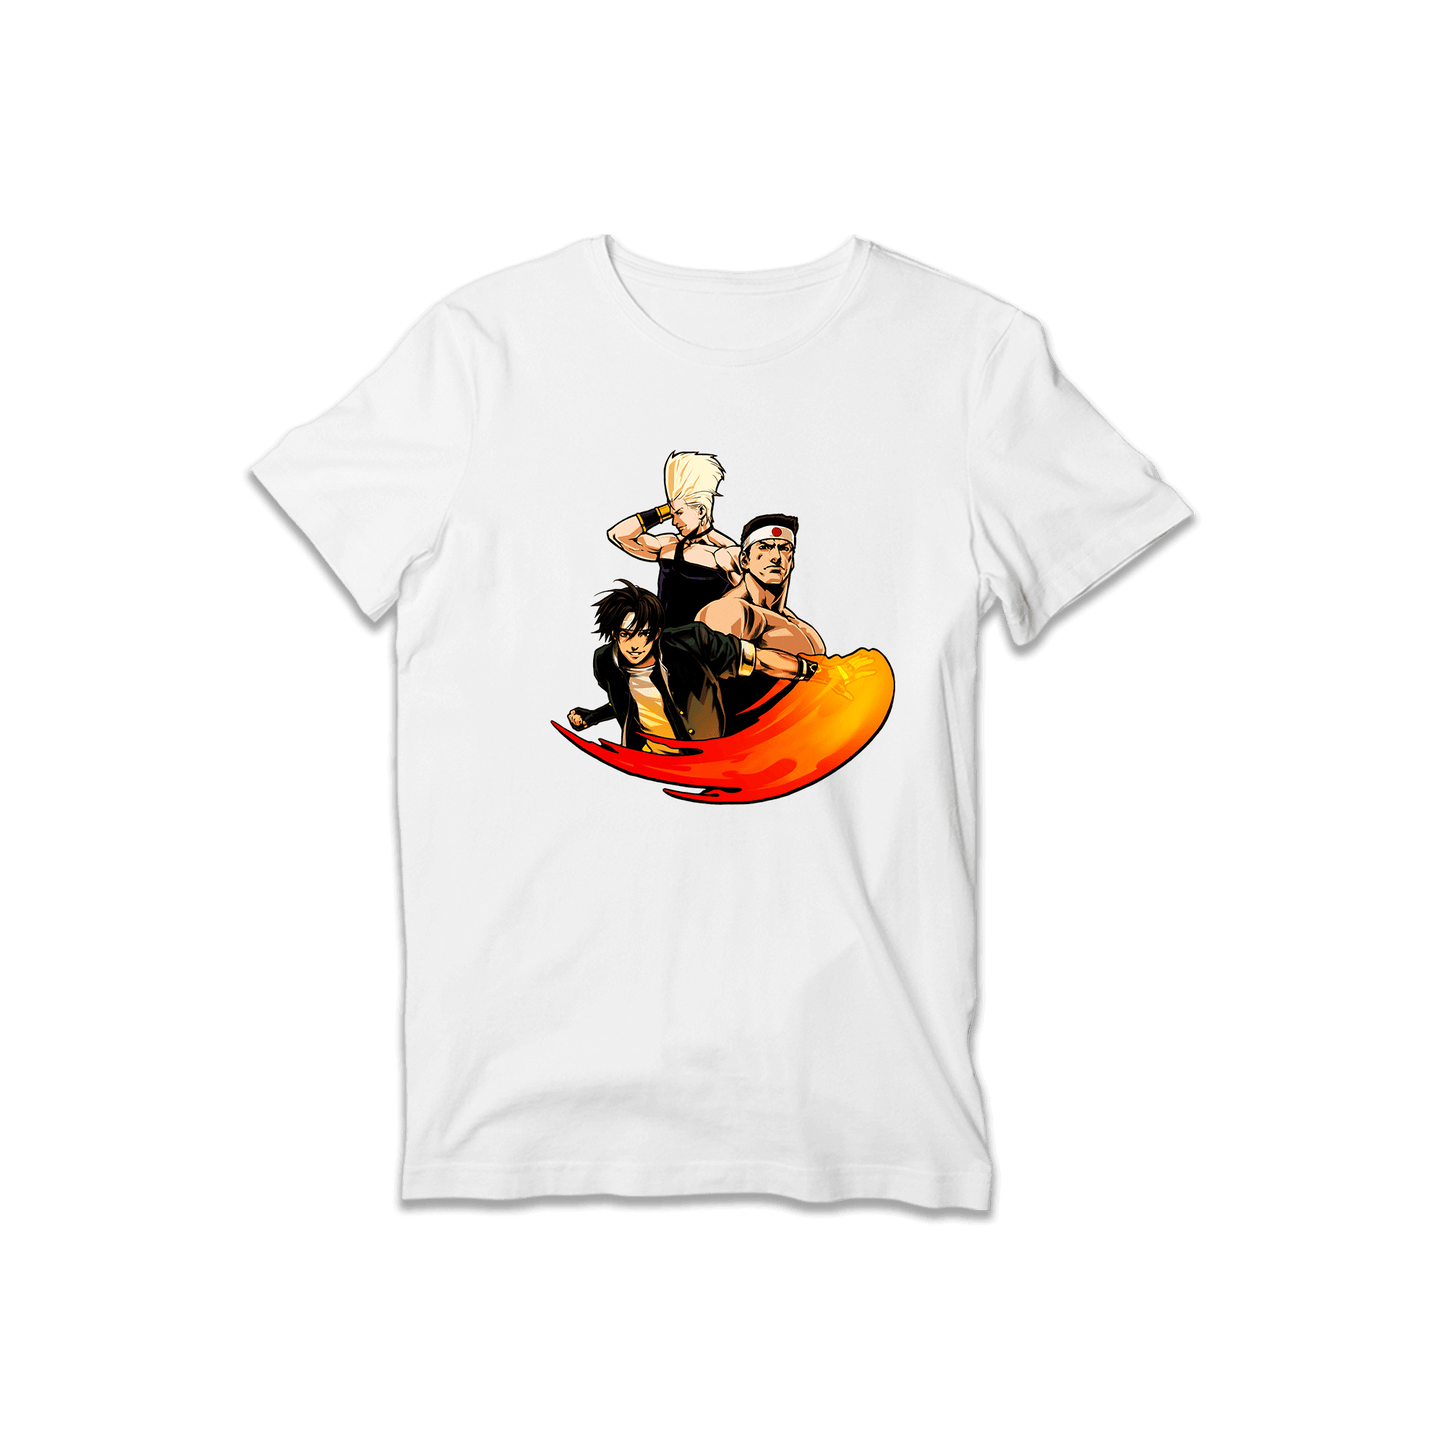 Kyo T-Shirt - The King of Fighters